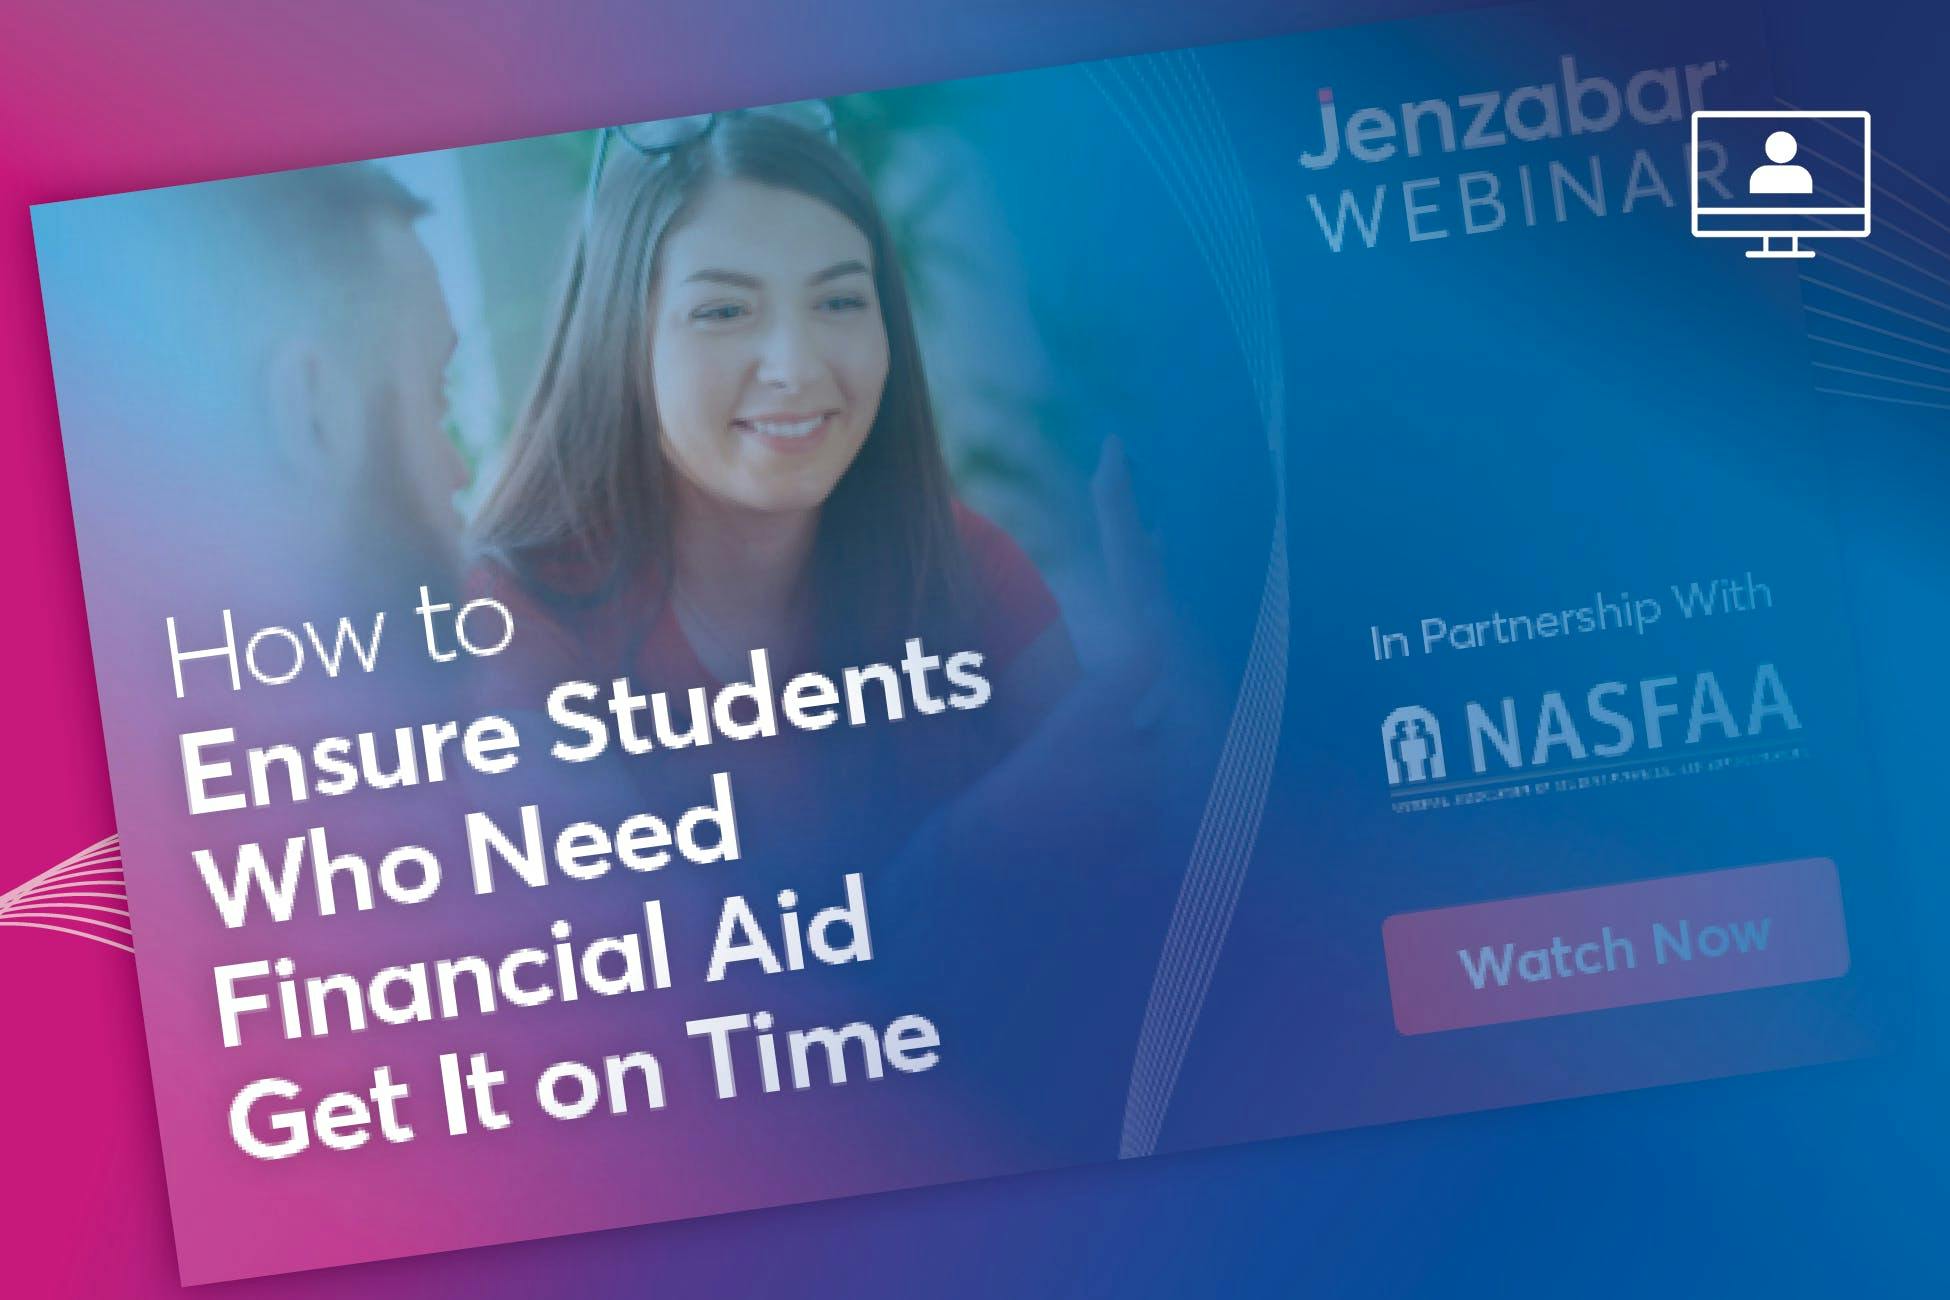 Webinar: How to Ensure Students Who Need Financial Aid Get It on Time